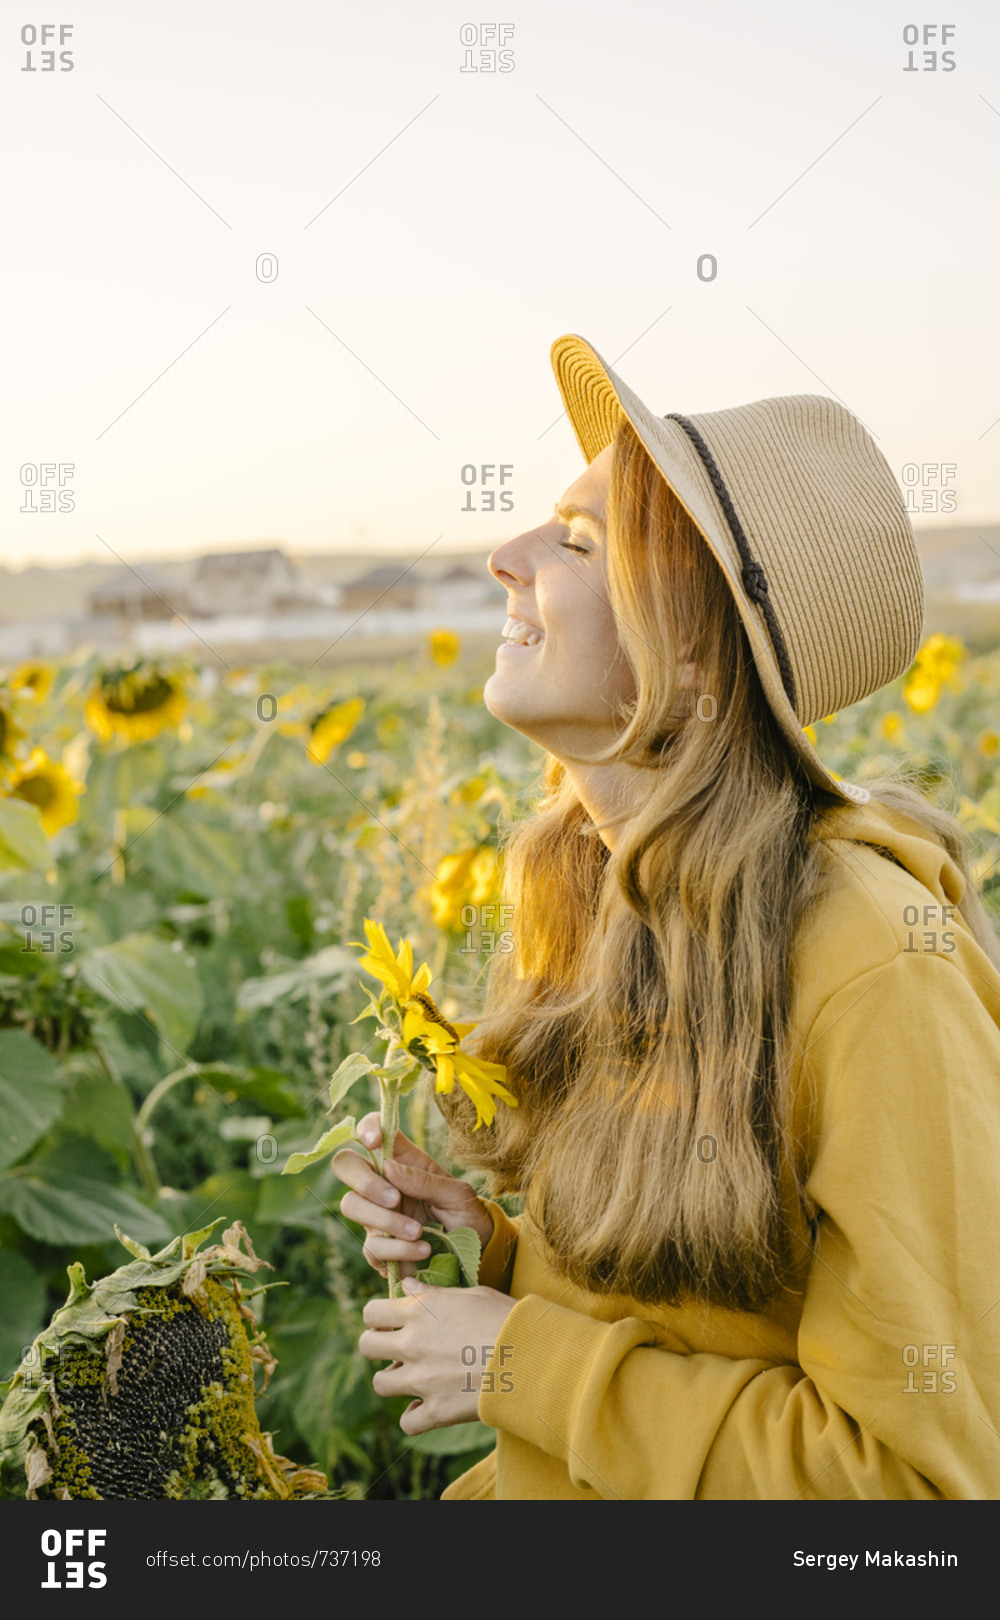 Portrait of a beautiful young woman holding a sunflower